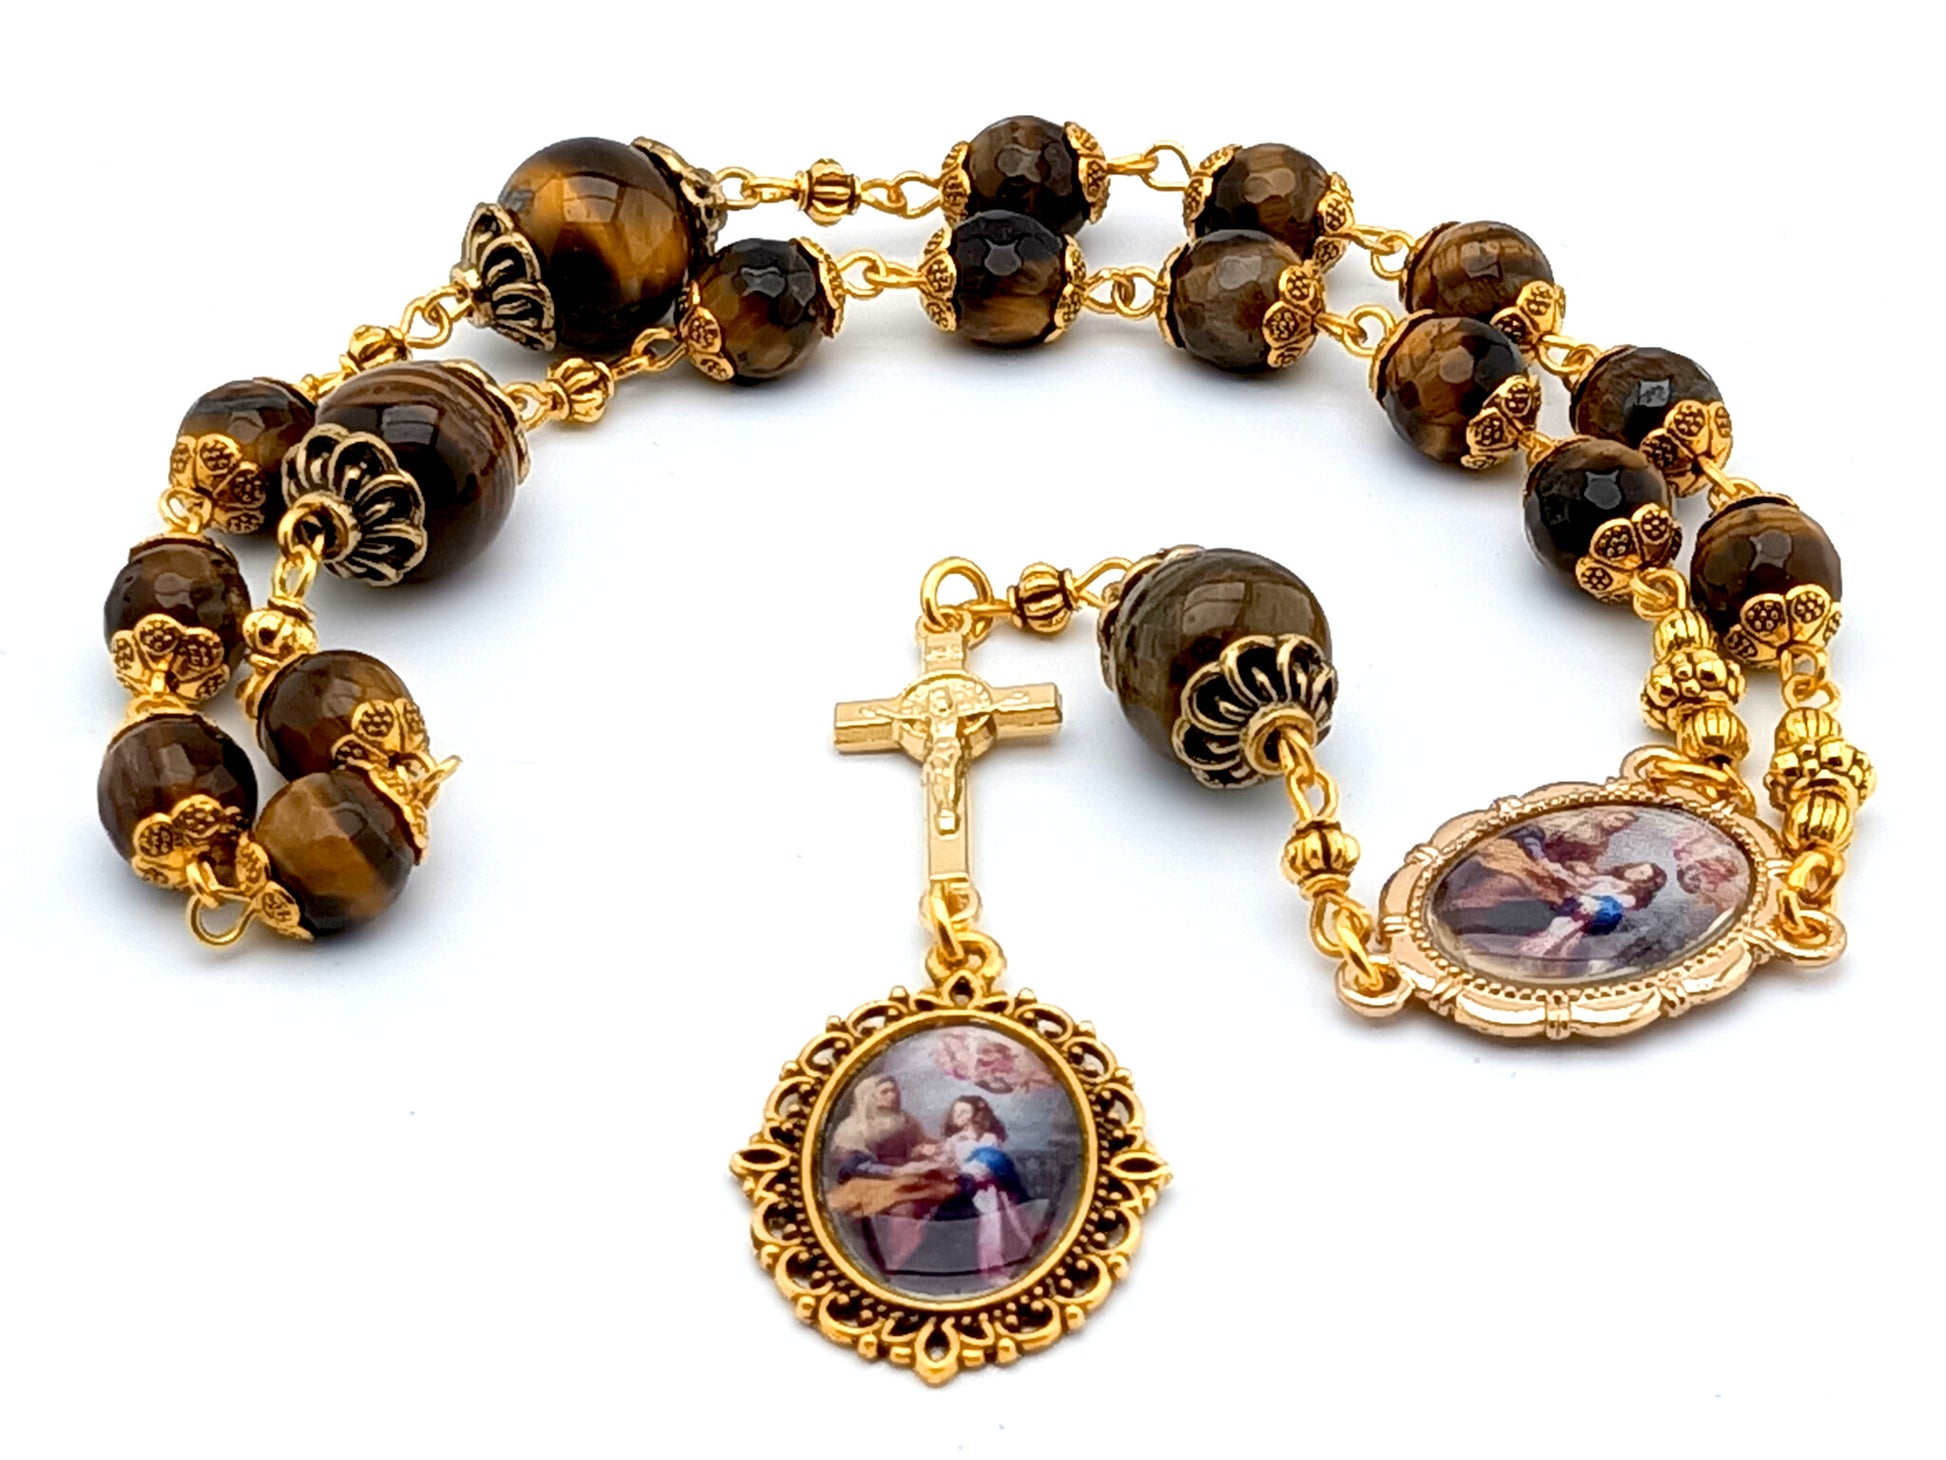 Saint Ann unique rosary beads prayer chaplet with tigers eye gemstone beads, golden crucifix and picture centre and end medals.